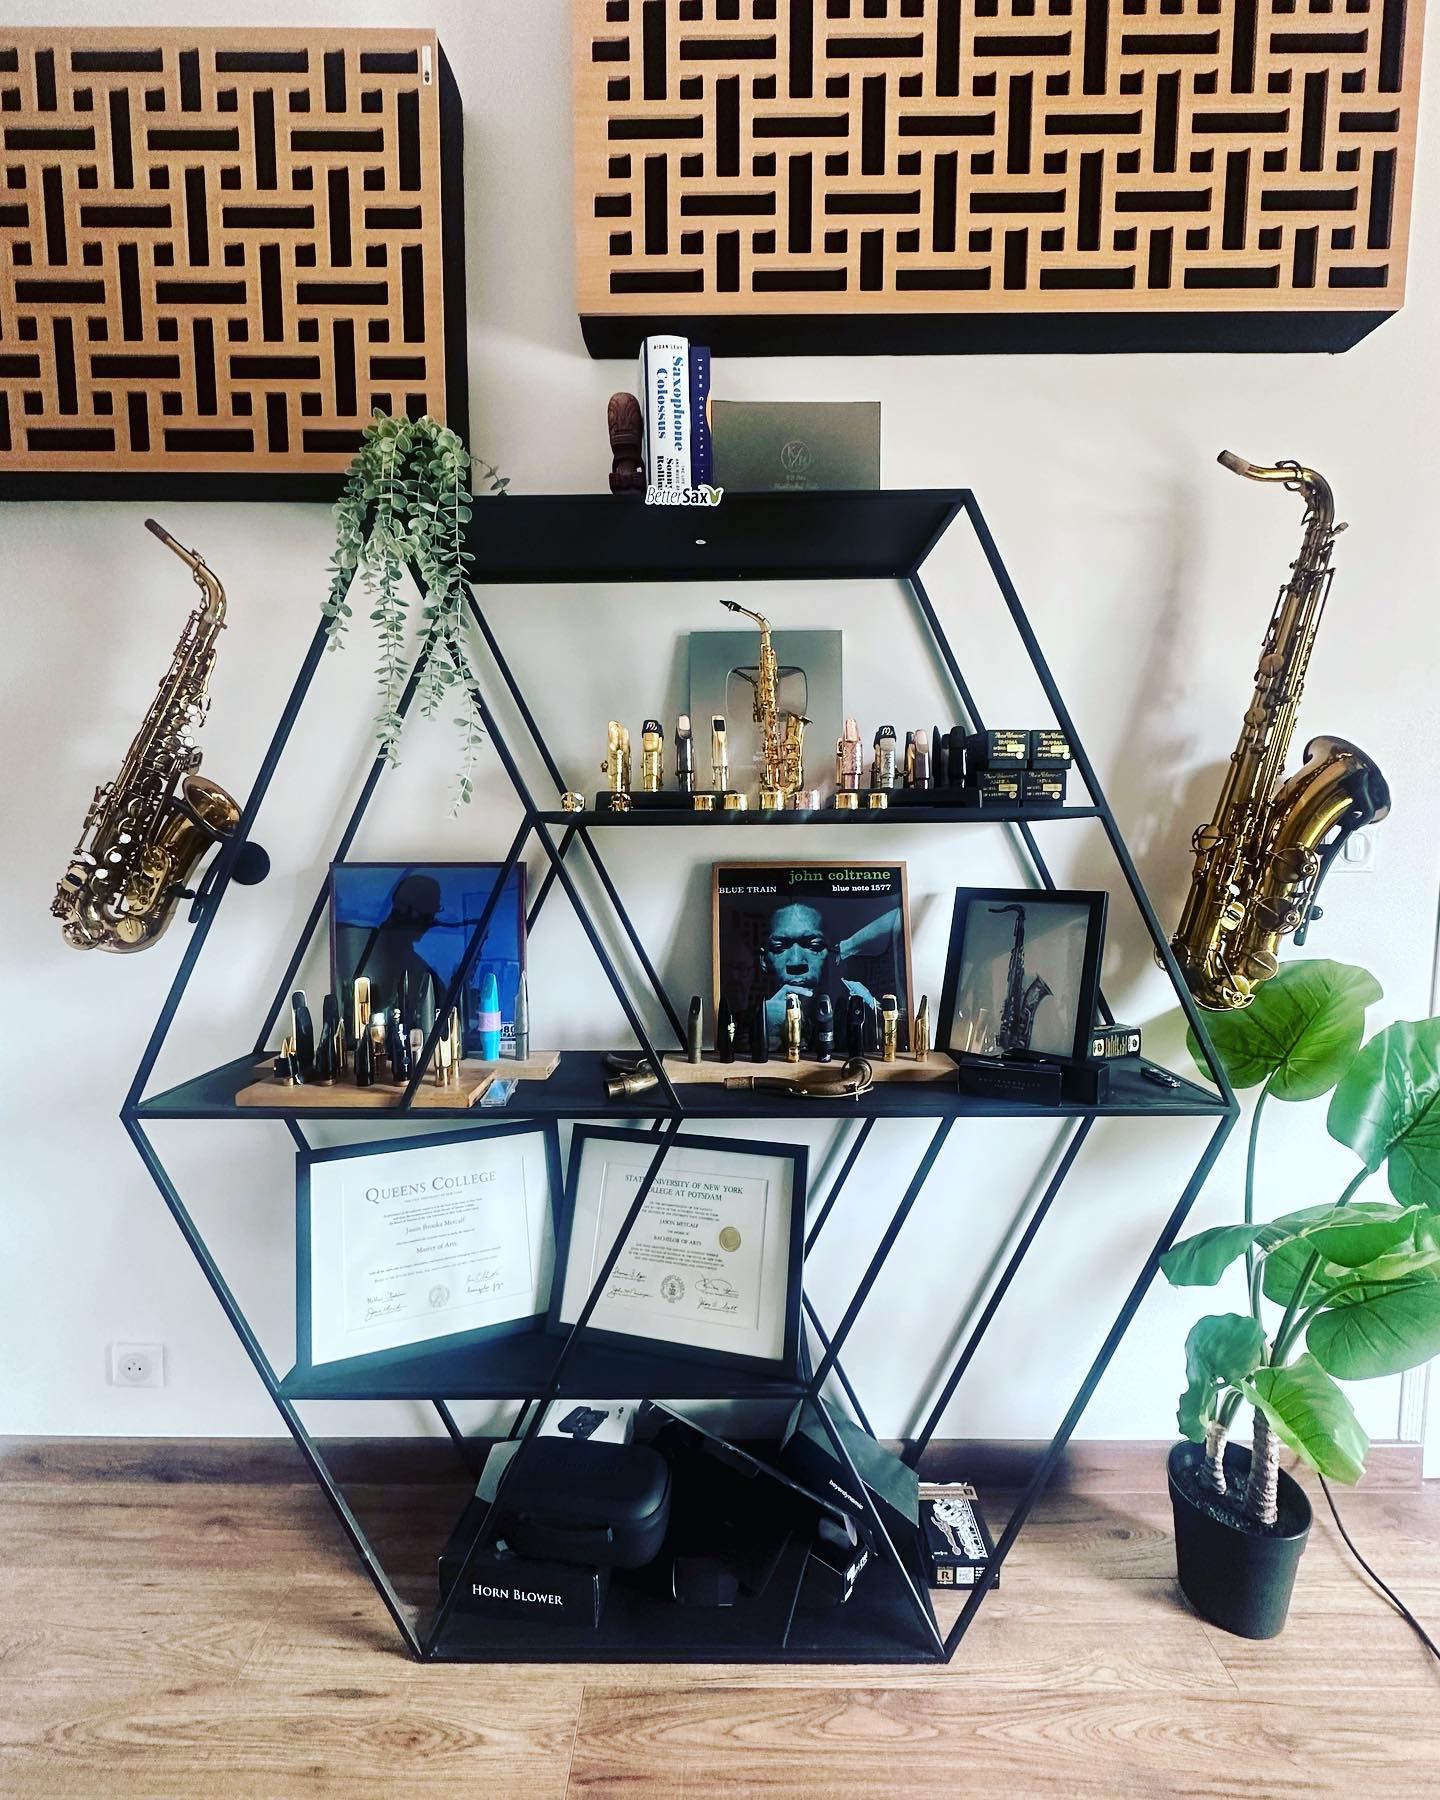 BetterSax Jay Metcalfs Shrine for music flanked by saxophones in wallmounts Locoparasaxo